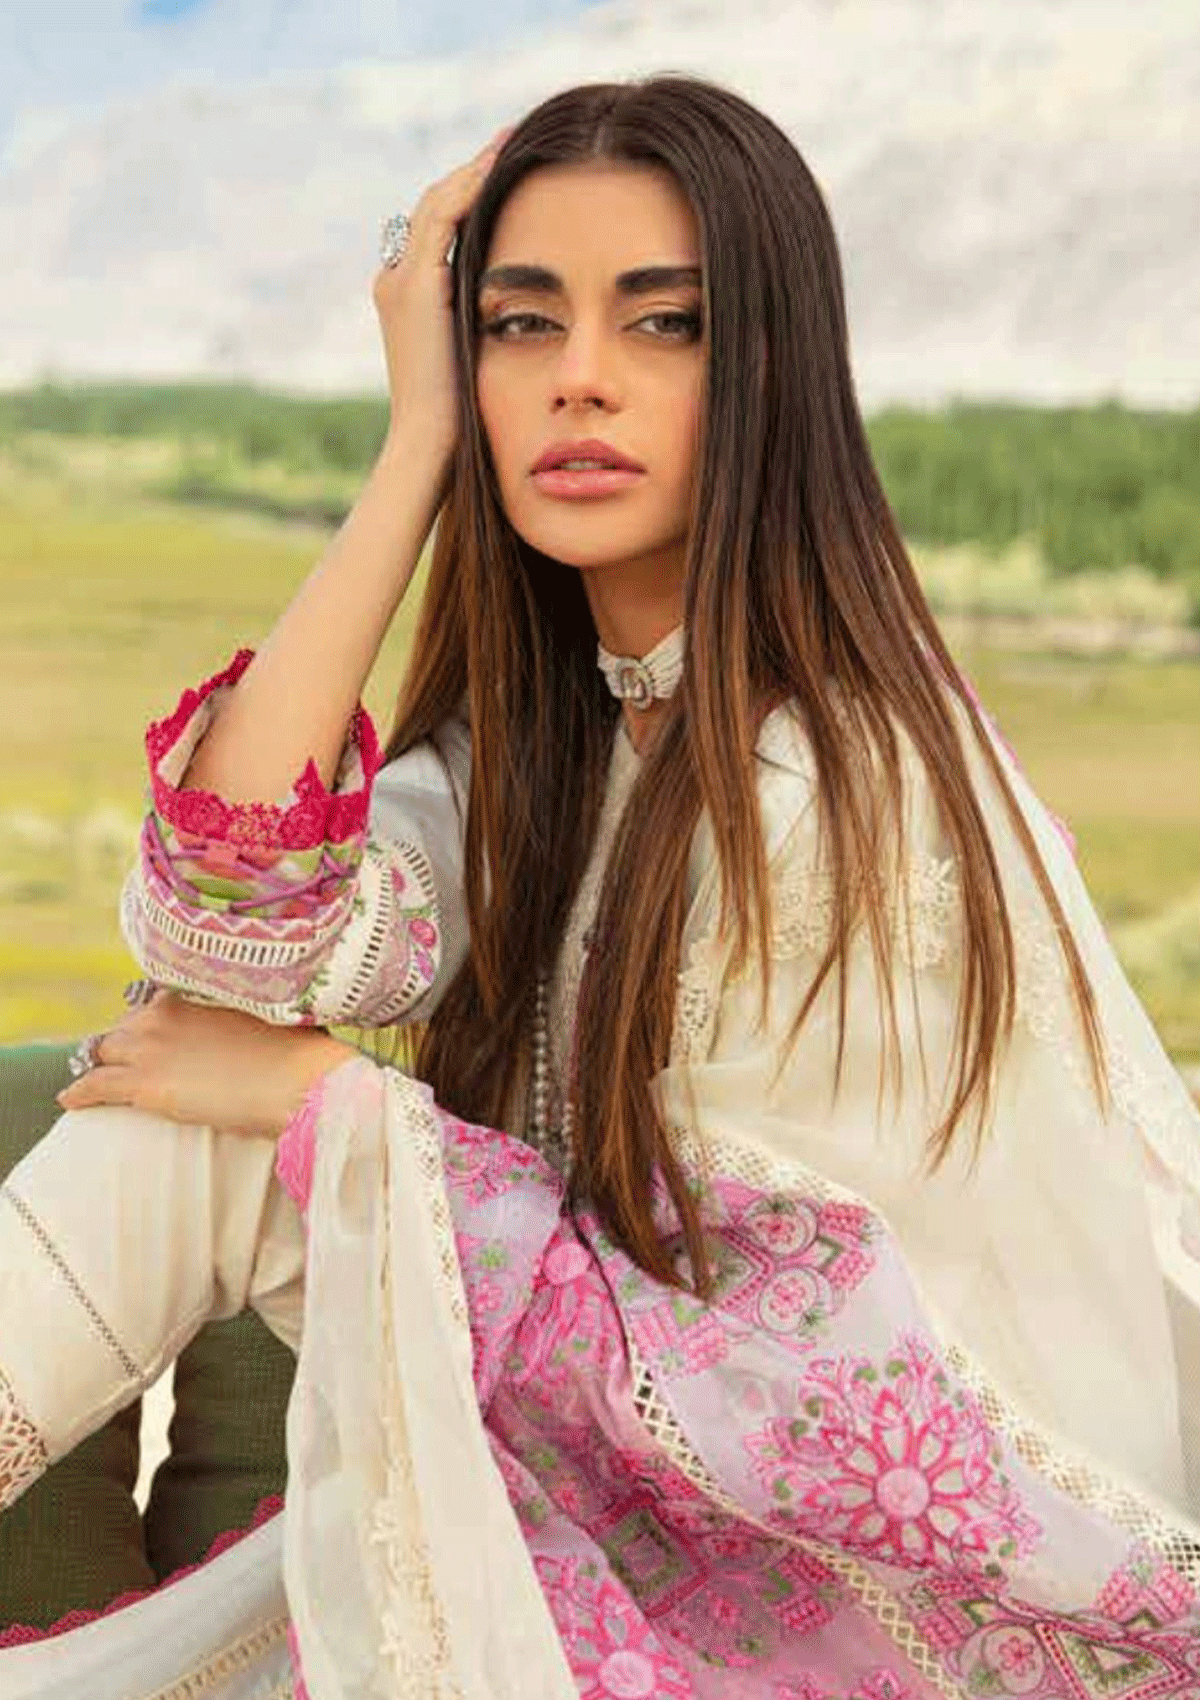 Shop Now, Moon Light - Luxury Lawn 2023 - Vol.2 - Maryam Hussain - Shahana Collection UK - Wedding and Bridal Party Dresses 